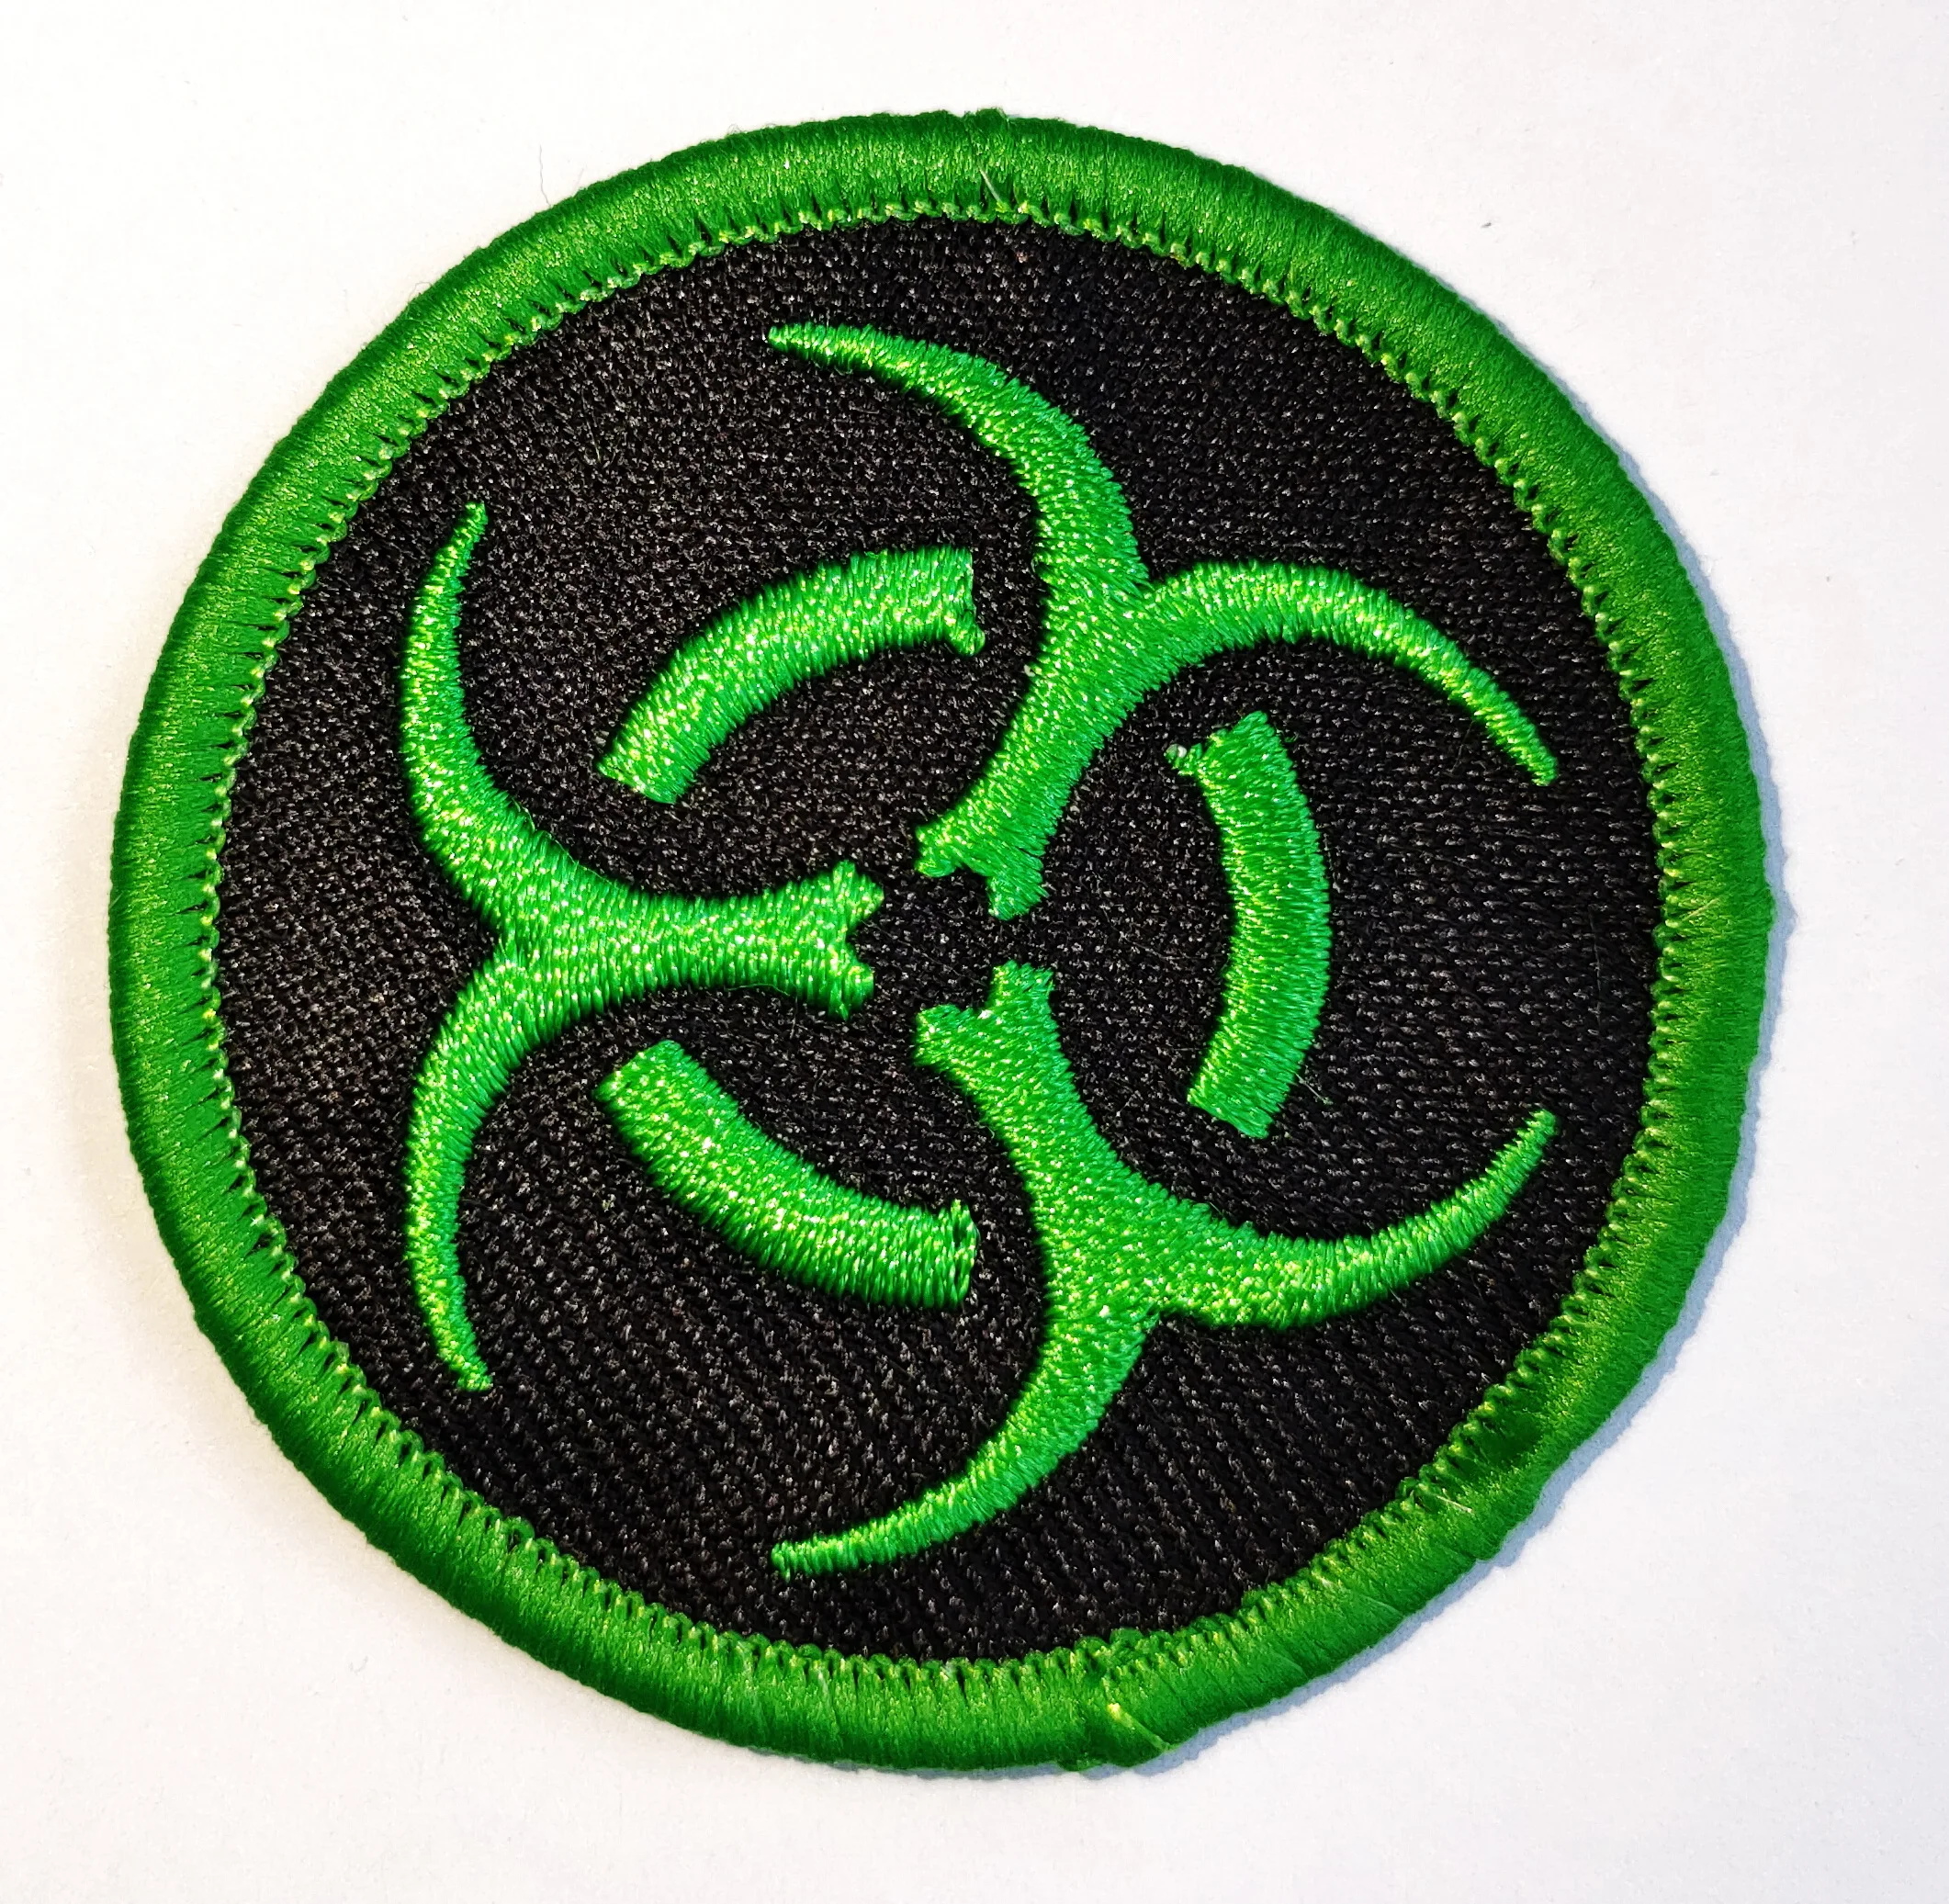 NUCLEAR RADIATION SYMBOL new EMBROIDERED IRON-ON PATCH GREEN RADIATION ZOMBIE 